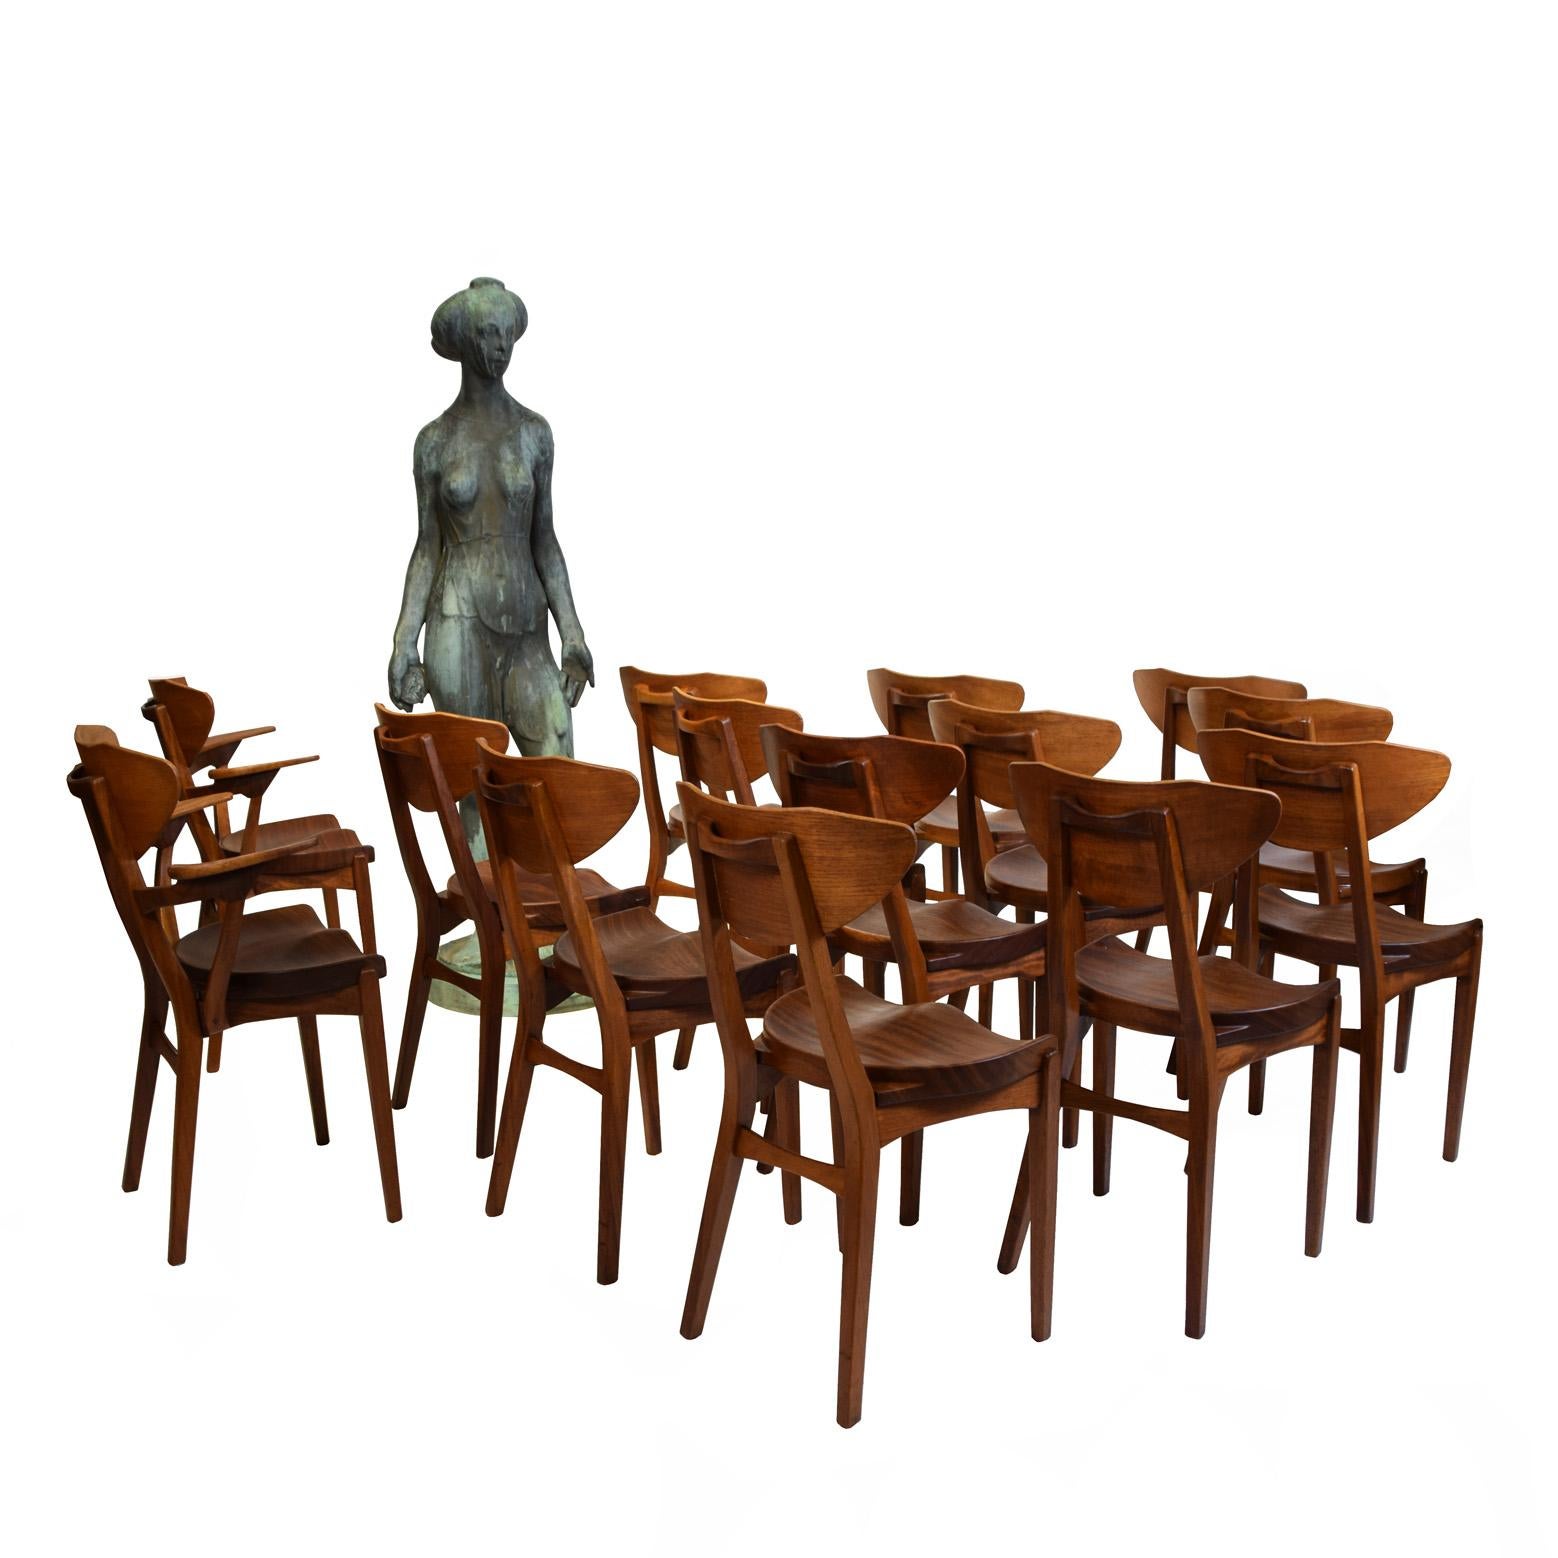 12 solid teak dining chairs and 2 armchairs. Saddle-shaped seat, back with handle. Produced by A. Hansen & Søn. Literature: Møbelfabrikanten, June 1951. Minor signs of wear.